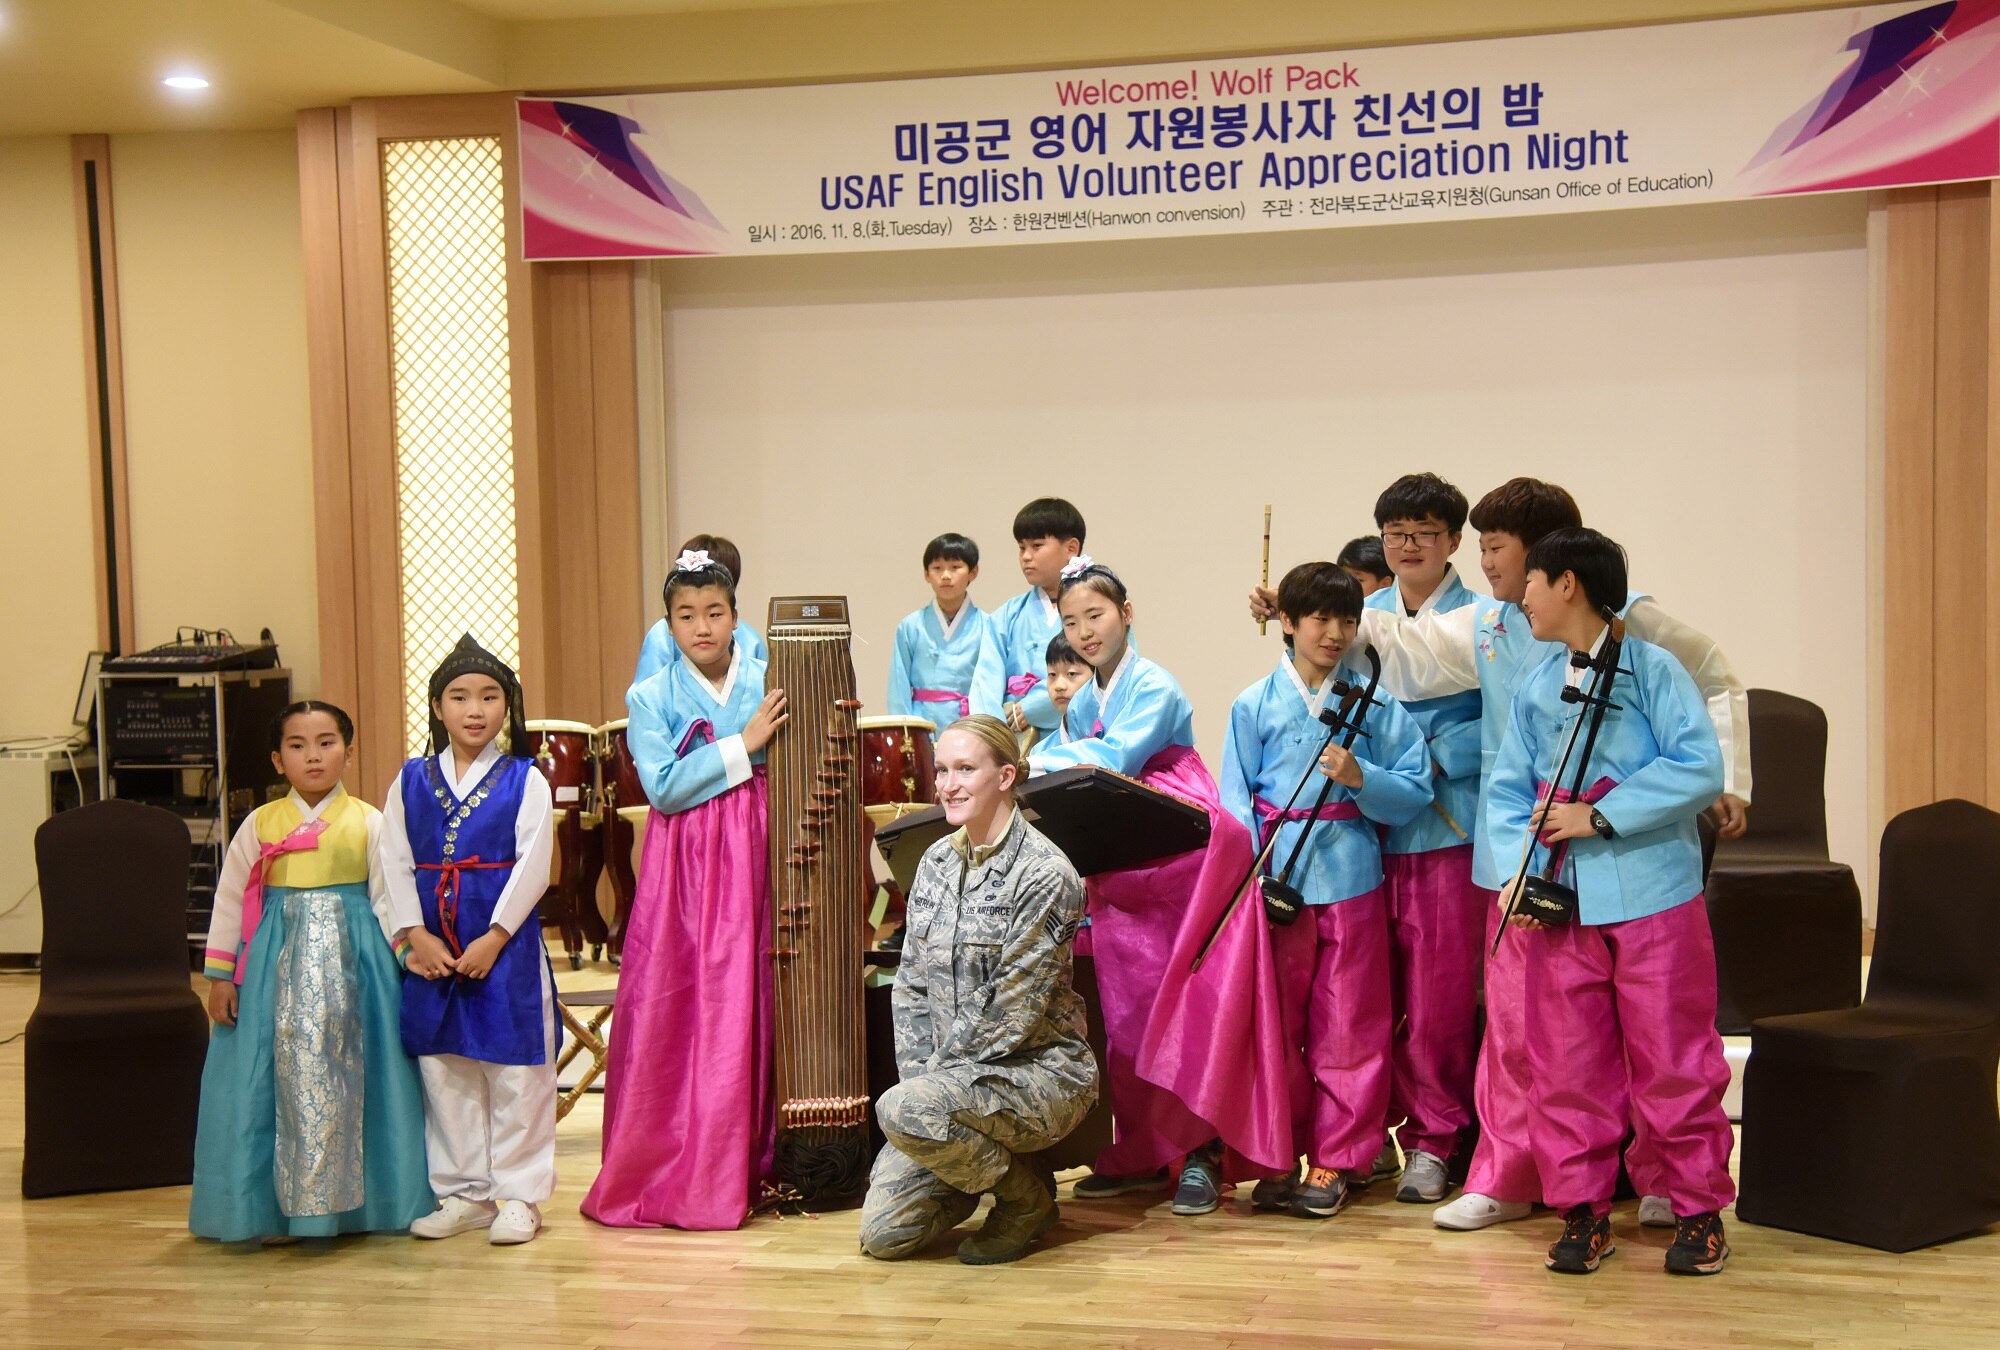 Staff Sgt. Robbin Toumberlin, 8th Operations Support Squadron noncommissioned officer in charge targets intelligence, is recognized with her students during an appreciation night at the Hanwon Convention room in the city of Gunsan, Republic of Korea, Nov. 8, 2016. Toumberlin taught English to local students in Gunsan City as a volunteer. (U.S. Air Force photo by Tech. Sgt. Jeff Andrejcik/Released)